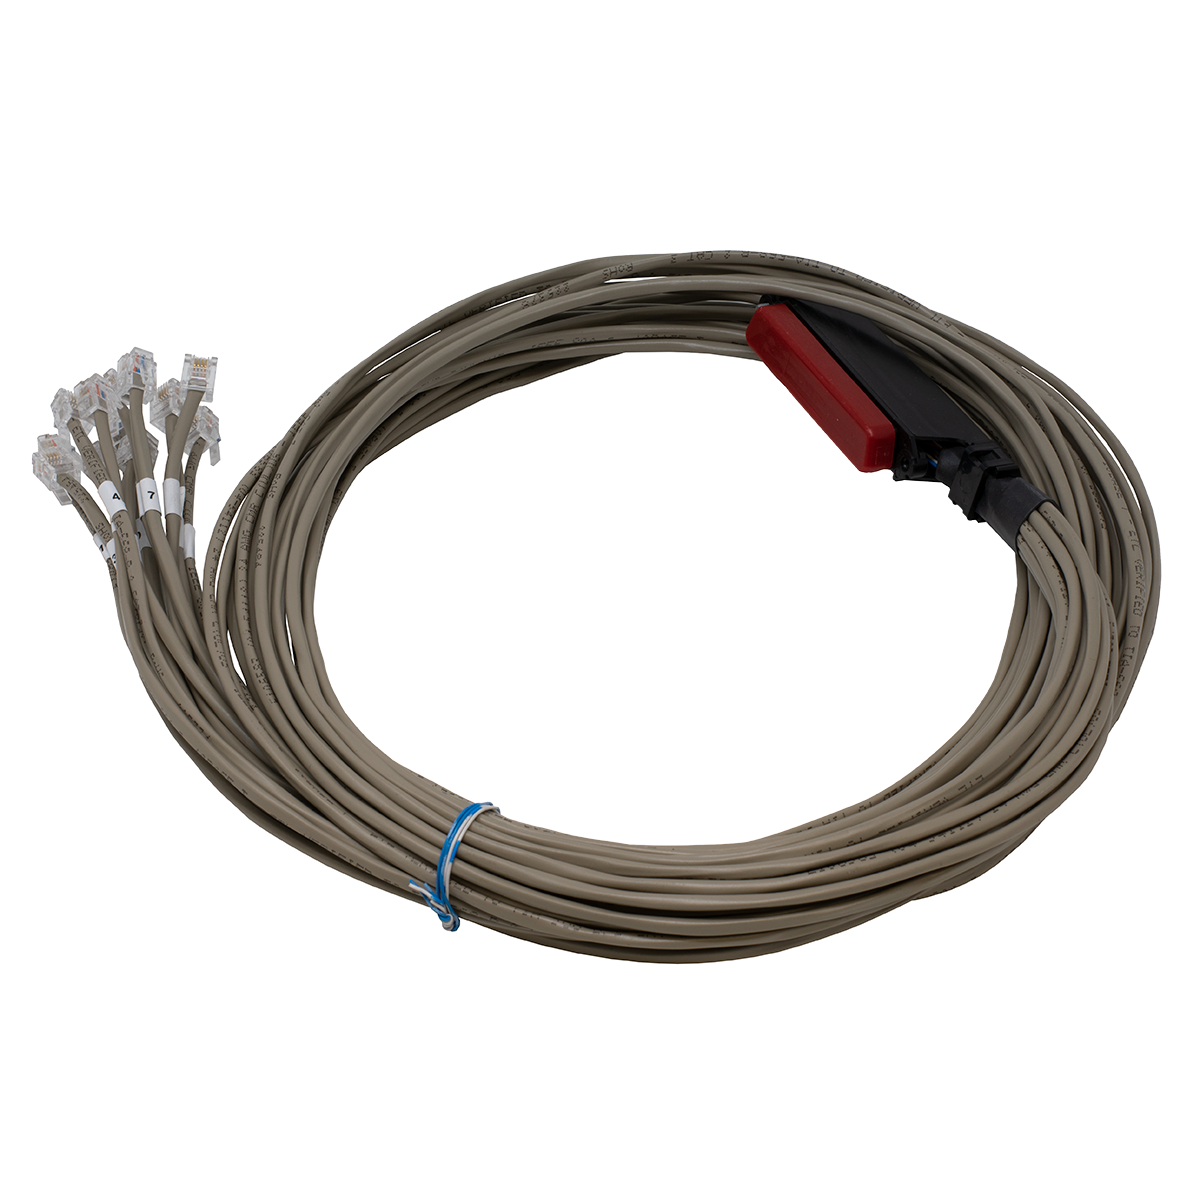 QWIK 6' 12x4 Octopus Cable with Female Amp